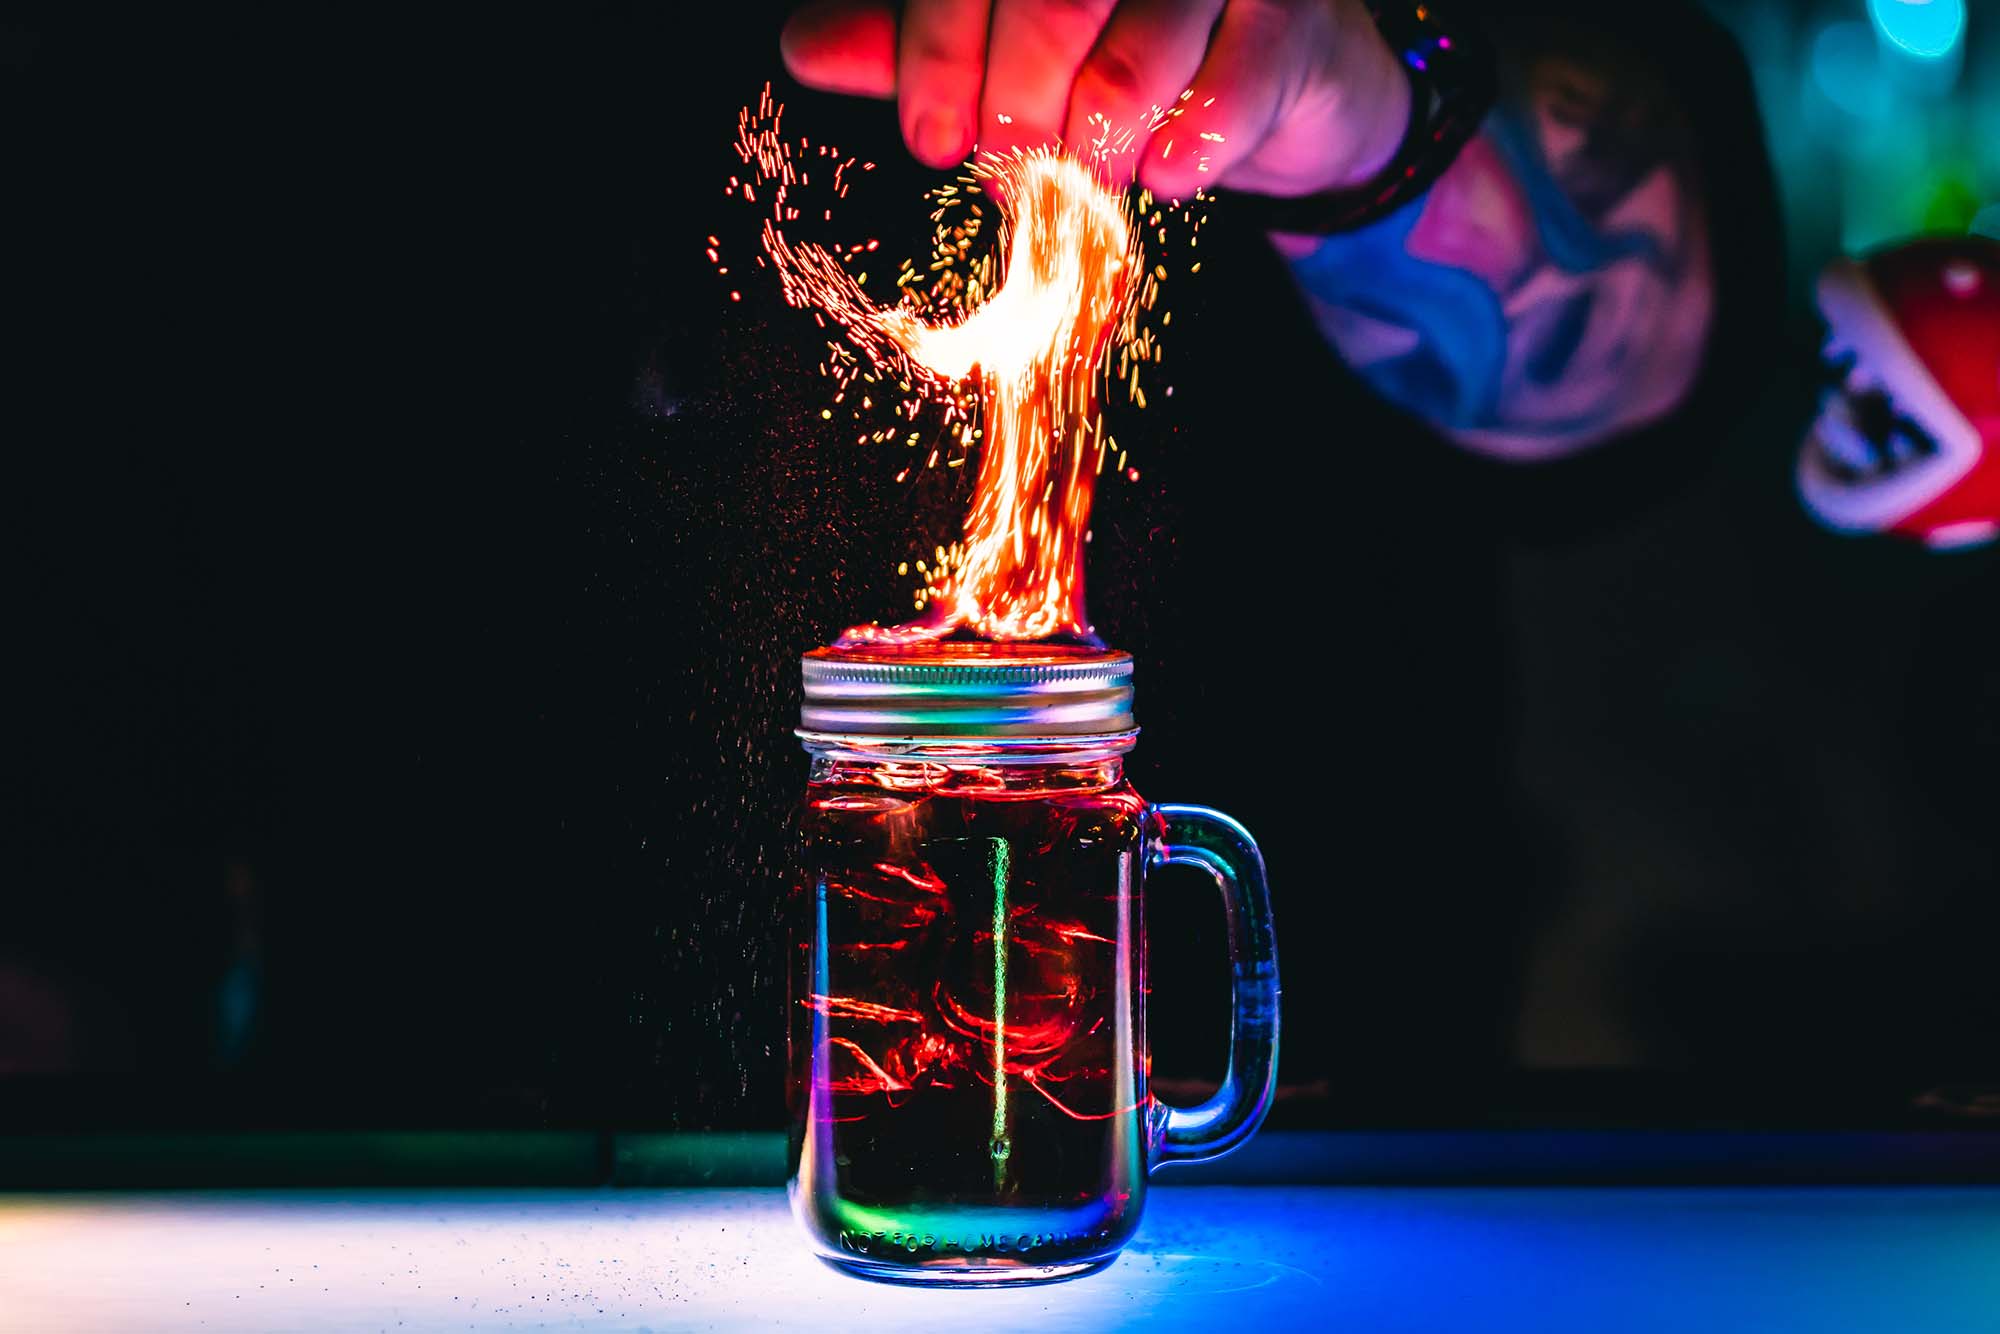 Bartender sets fire to a drink.